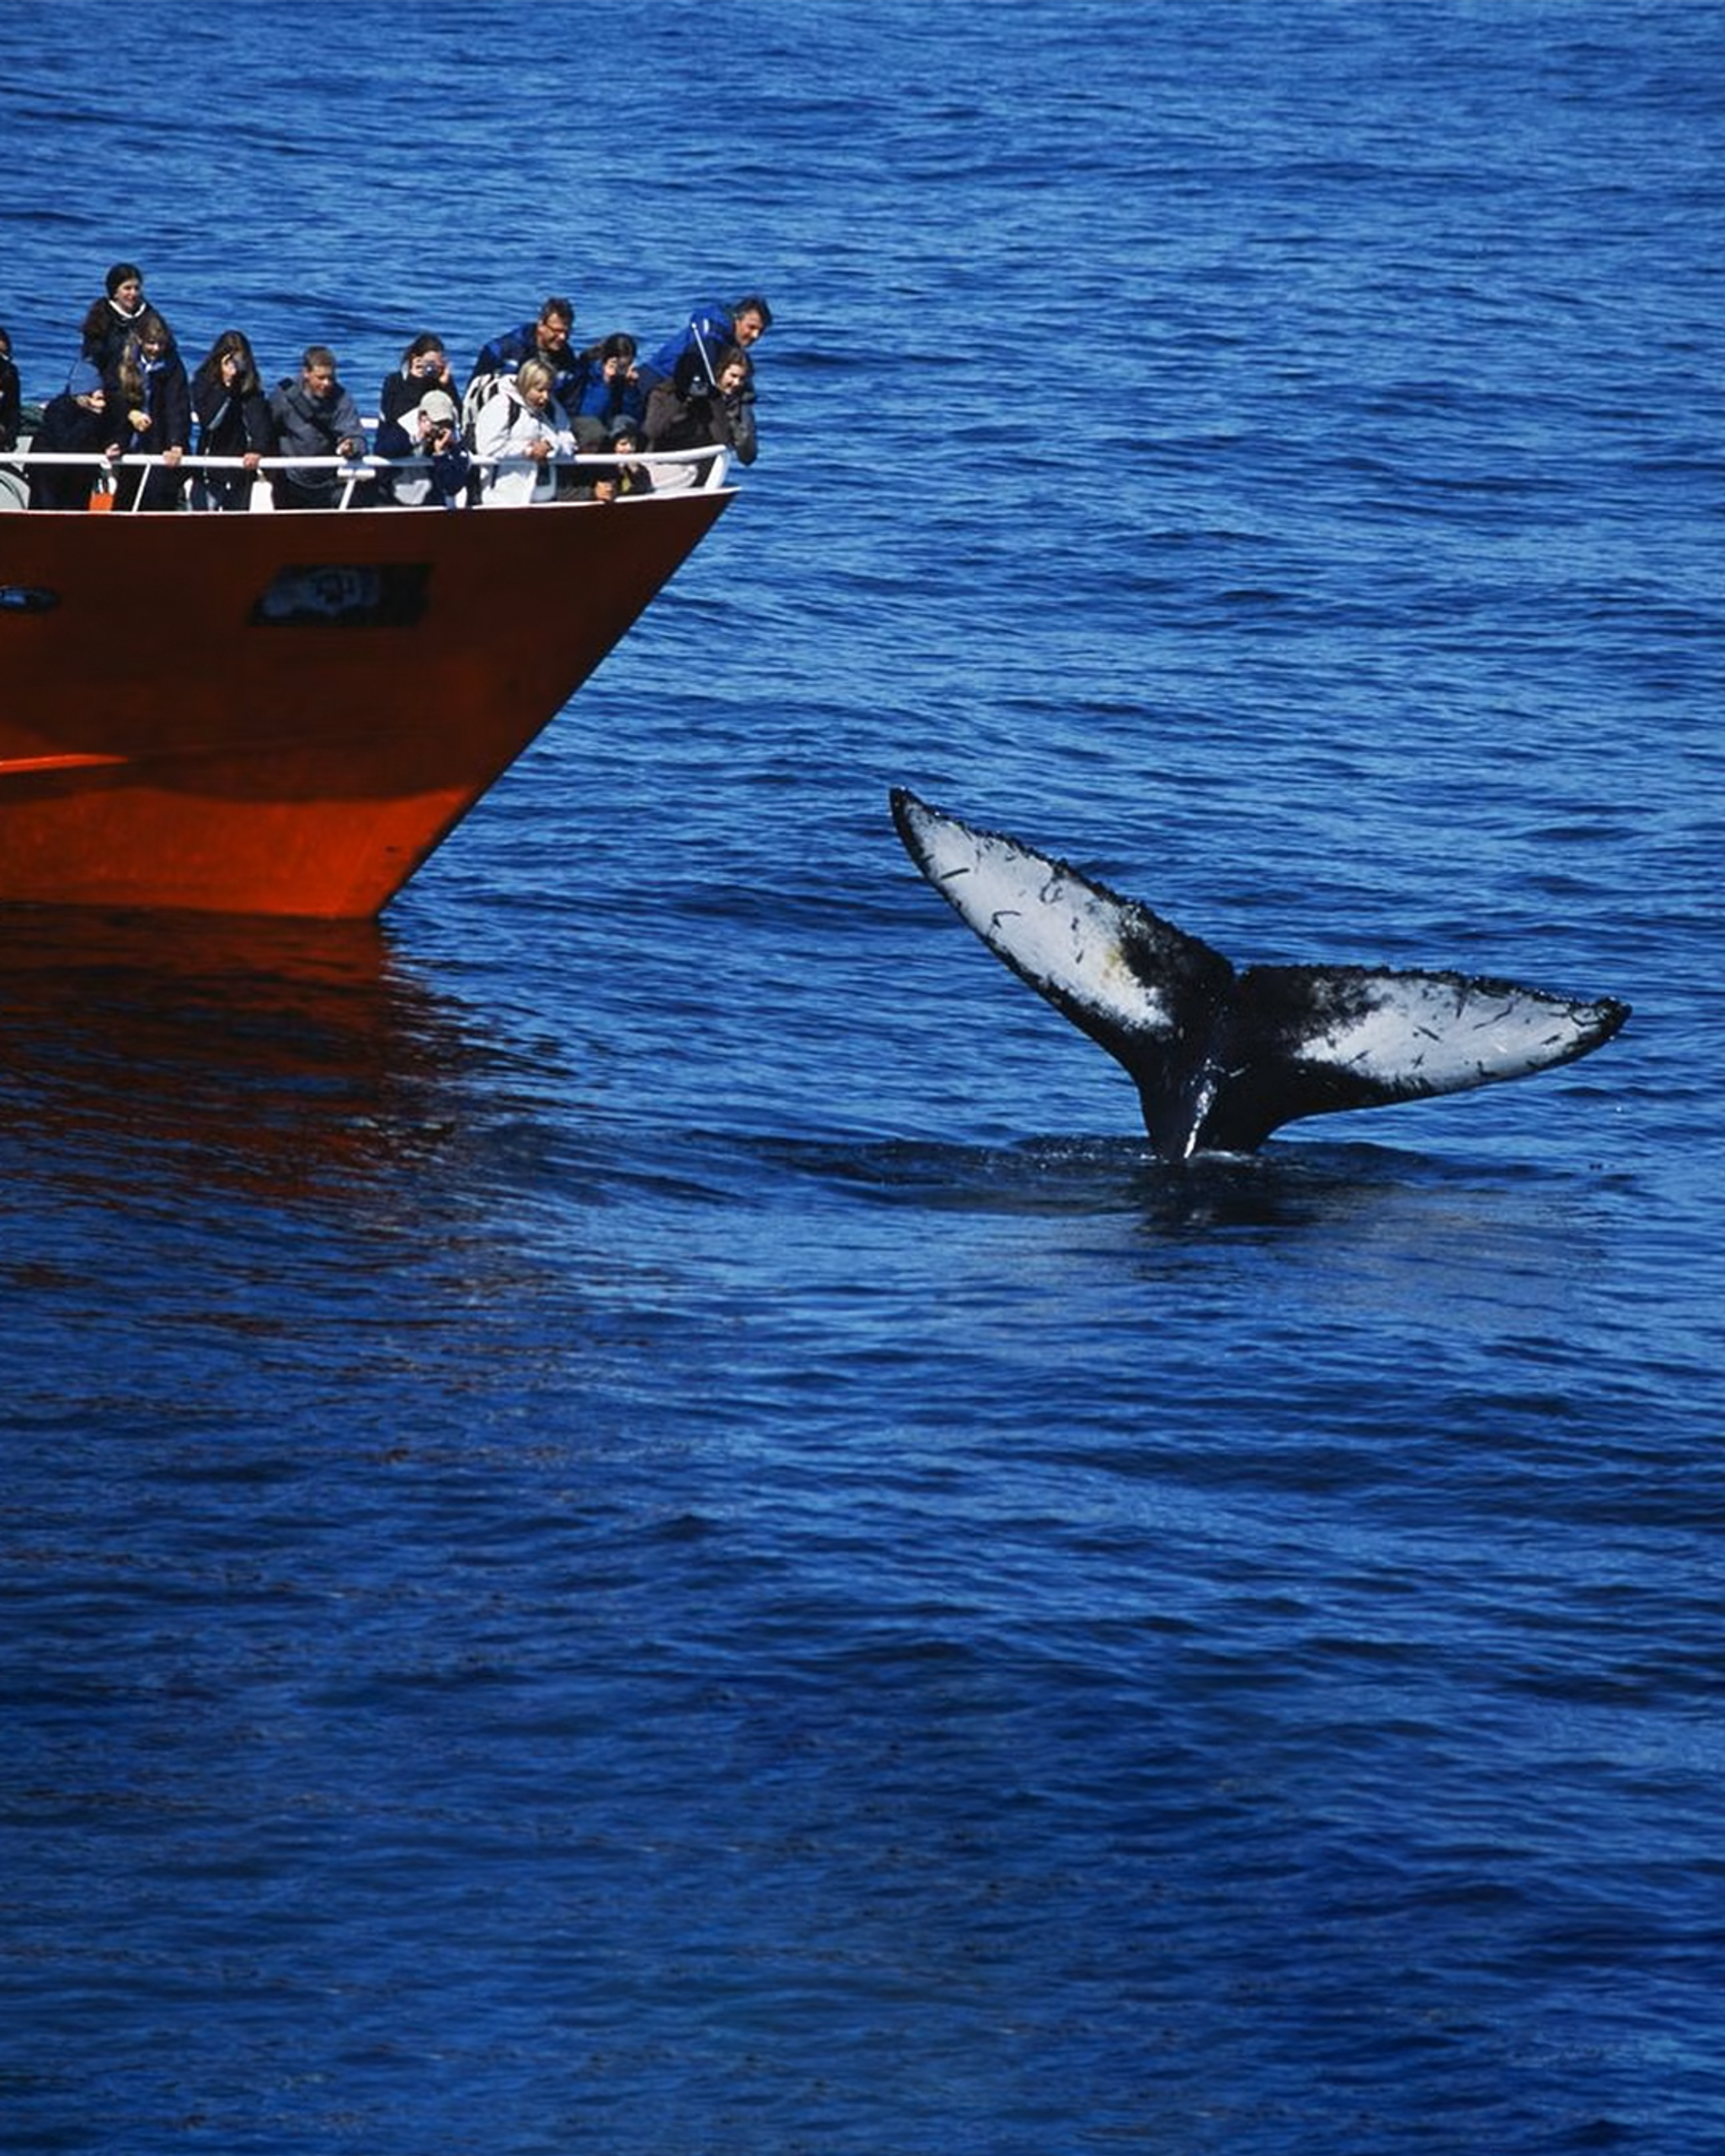 A group of whale watchers on a boat tour in Iceland